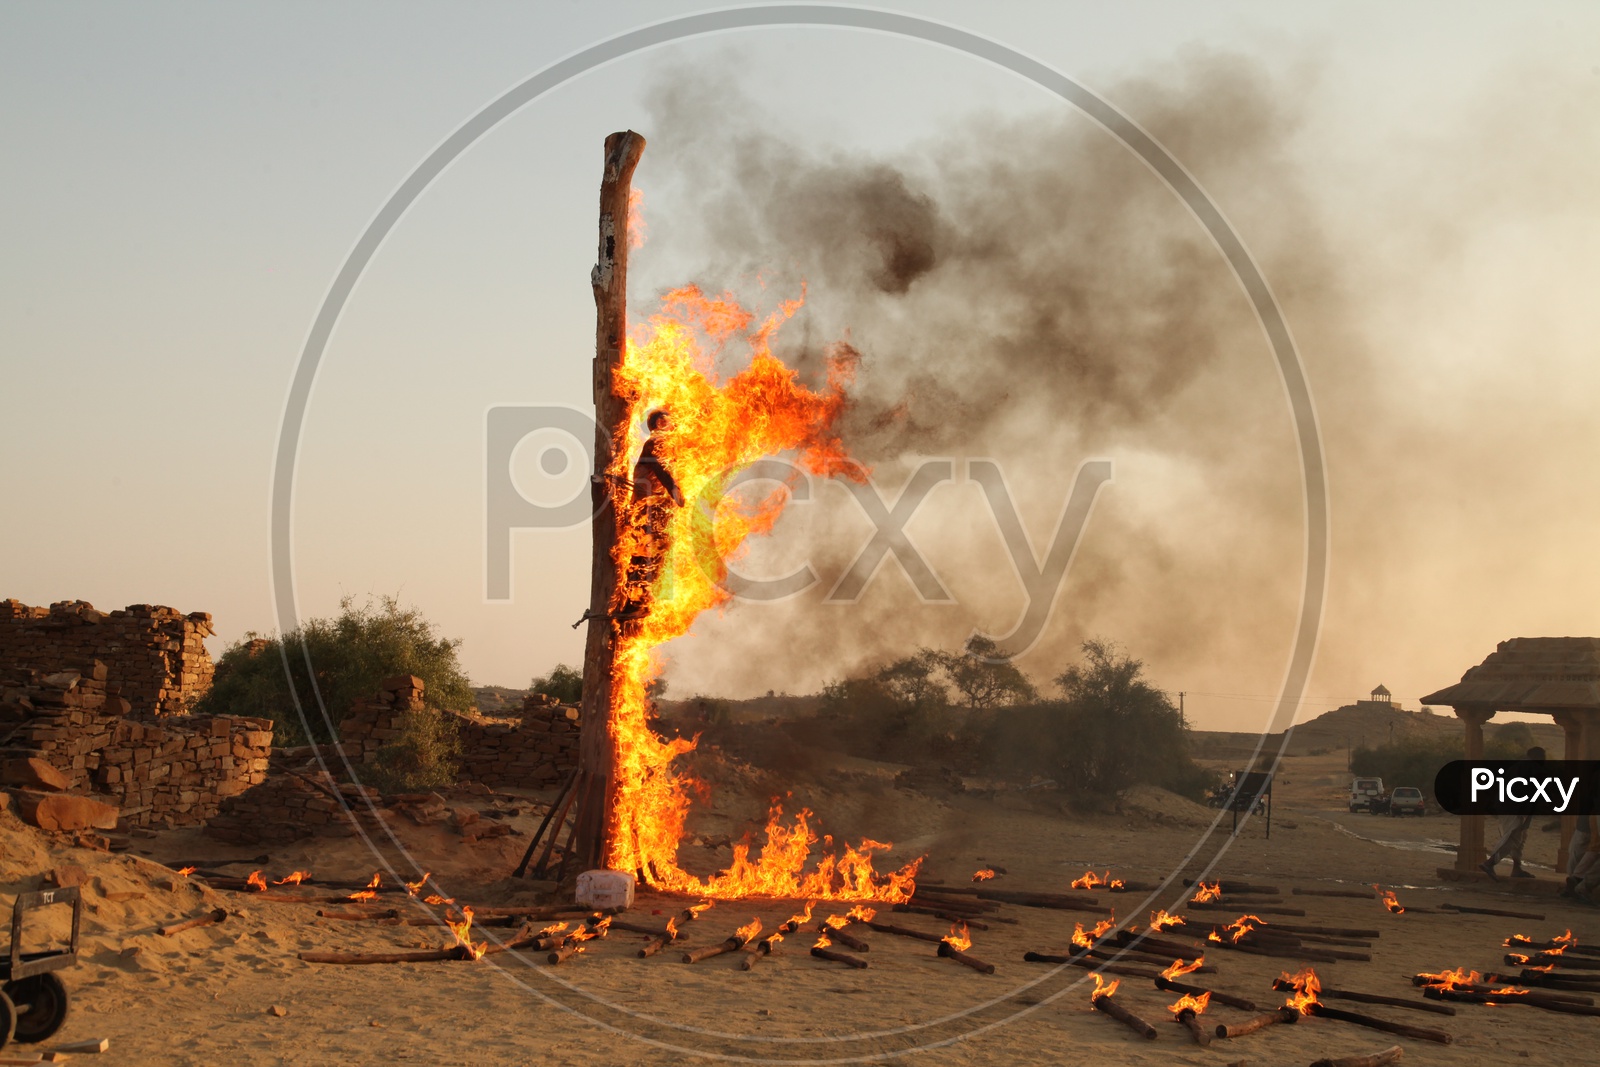 A man is burnt tied to a pillar in Agitation